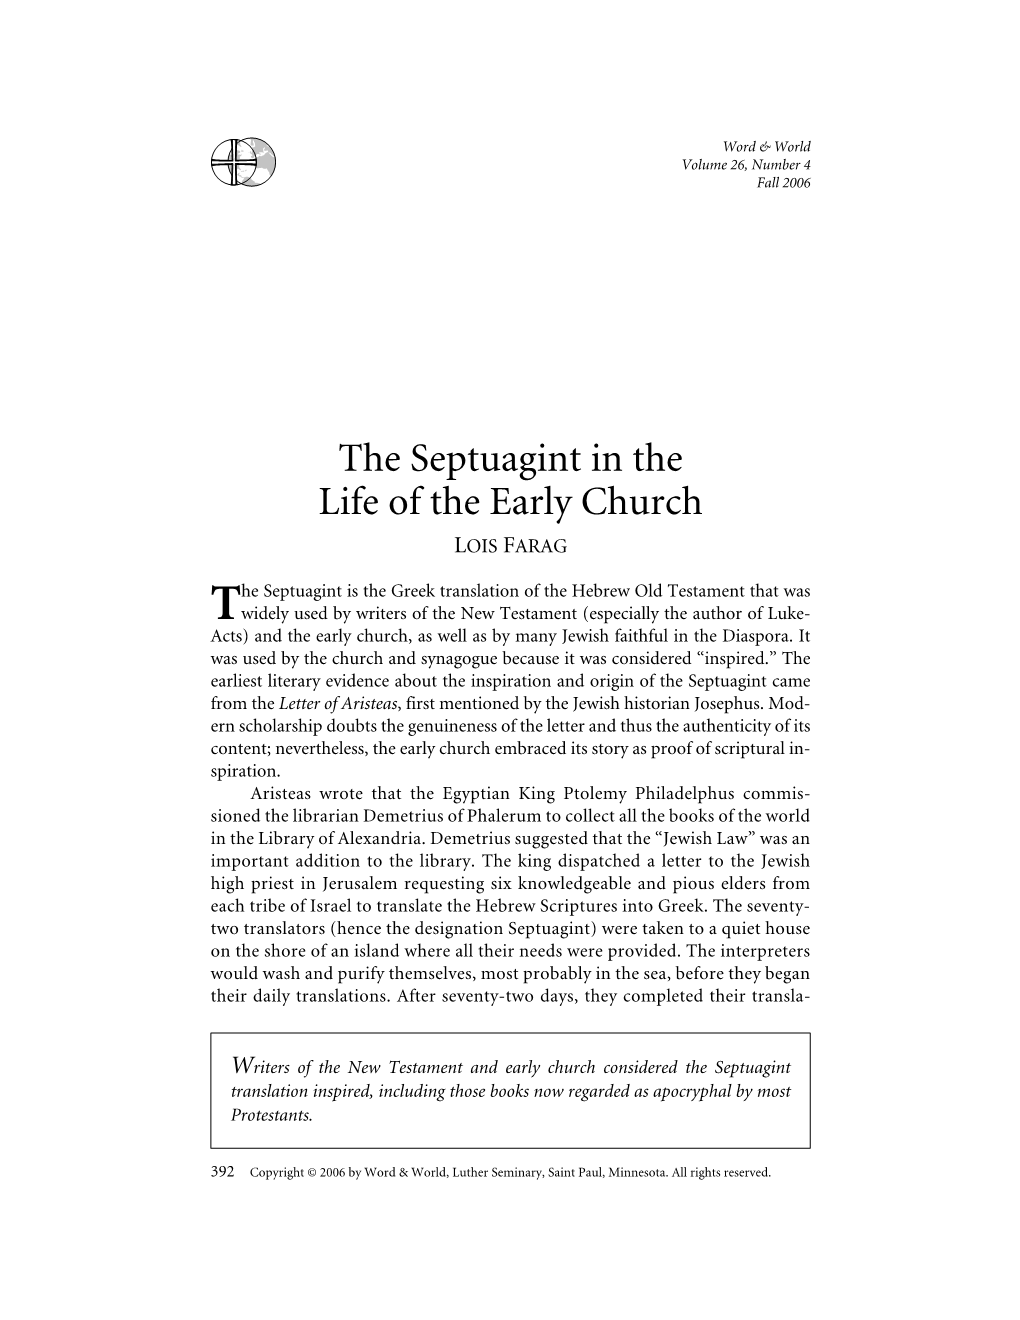 The Septuagint in the Life of the Early Church LOIS FARAG